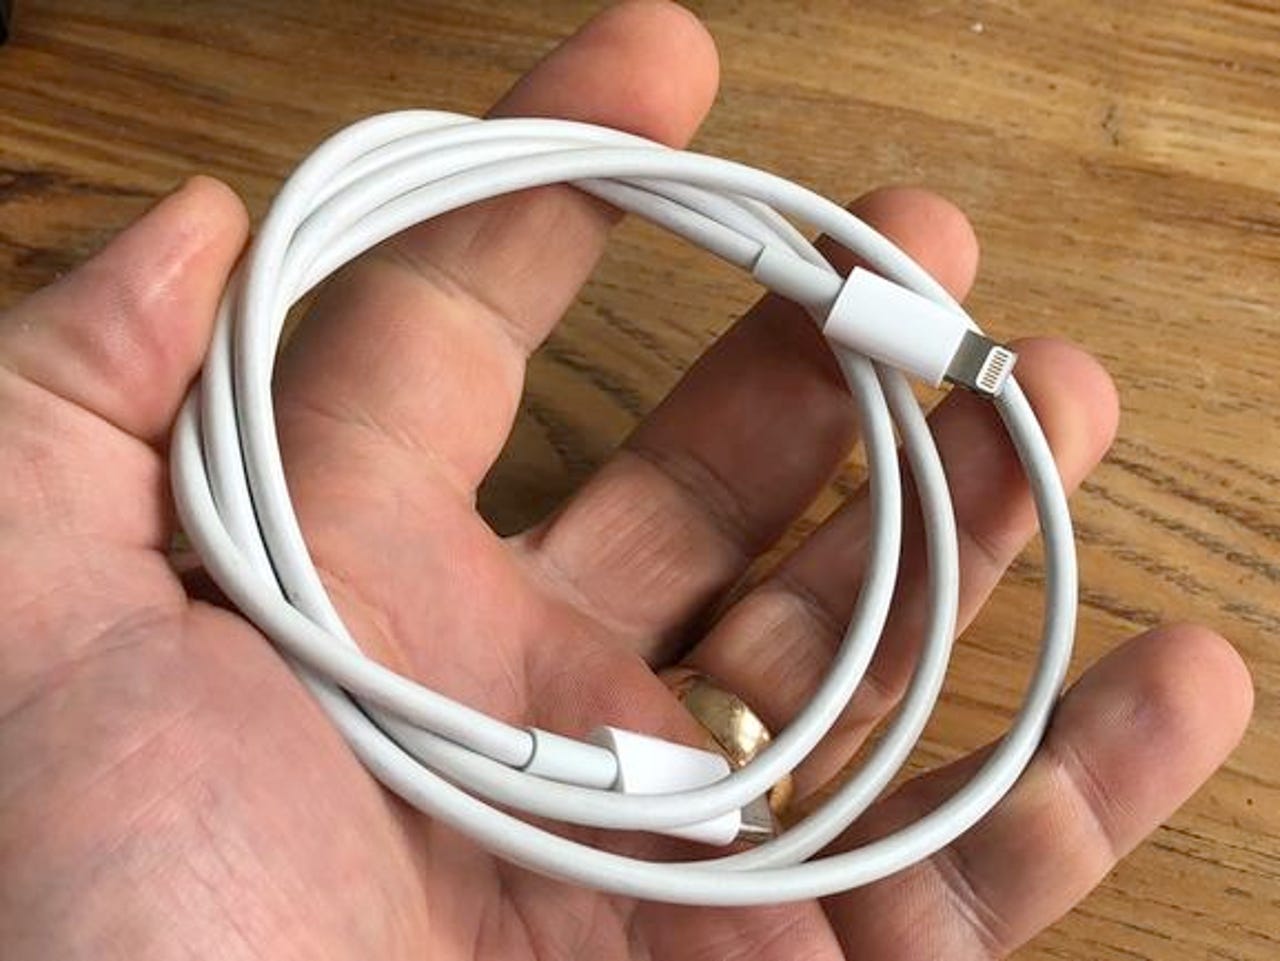 Apple USB-C fast-charge cable